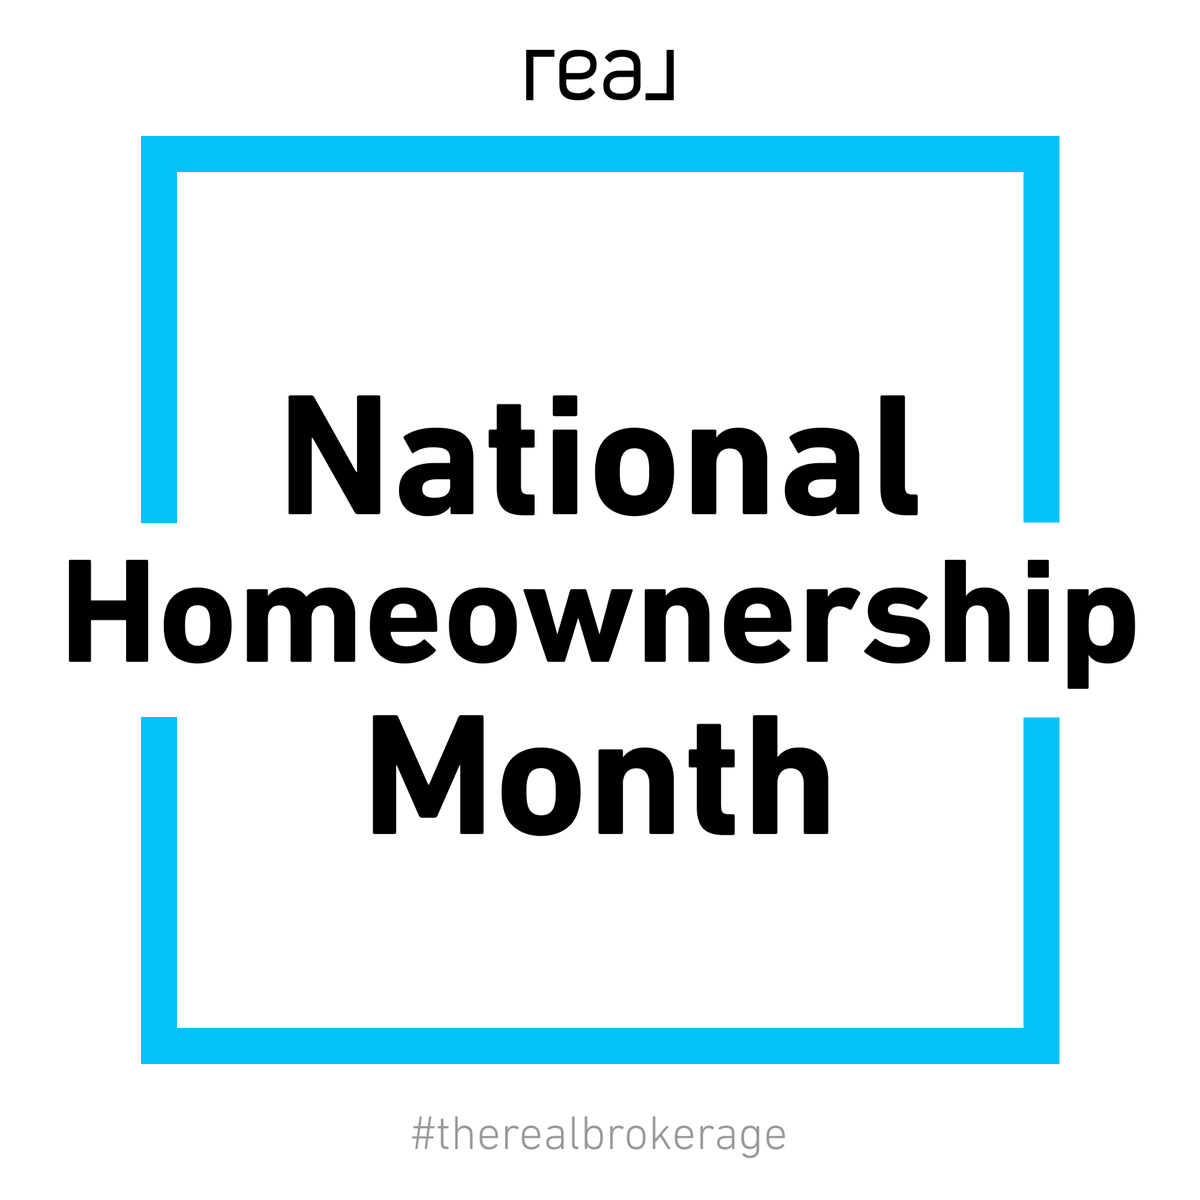 June is National Homeownership Month! We are so grateful to be a part of helping people achieve their dream of owning a home.

#therealbrokerage #workhardbekind #nationalhomeownershipmonth